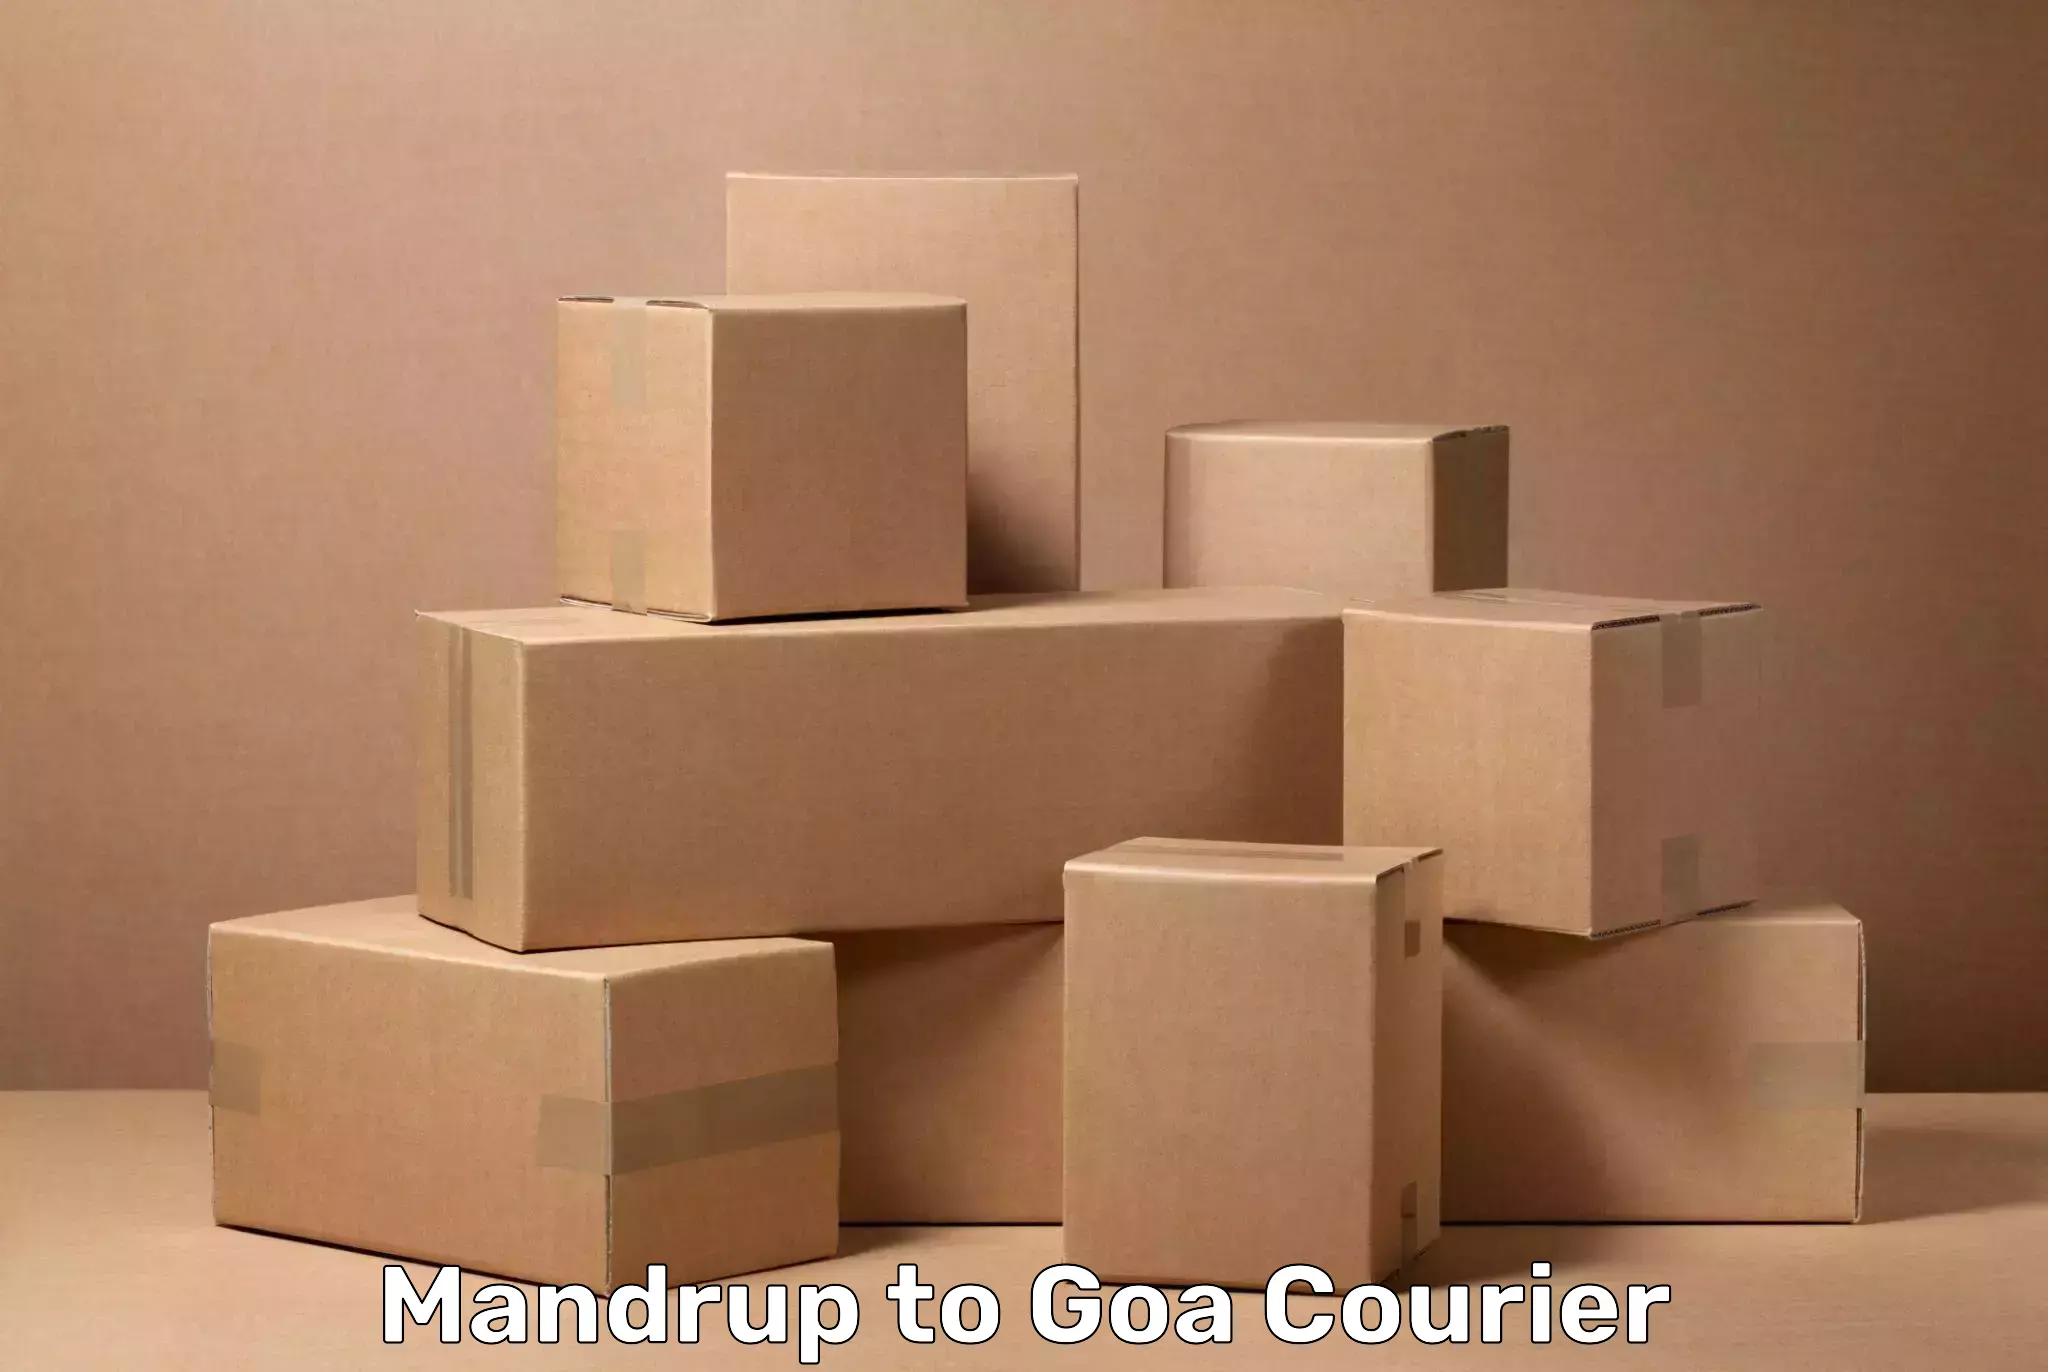 Baggage transport network Mandrup to Goa